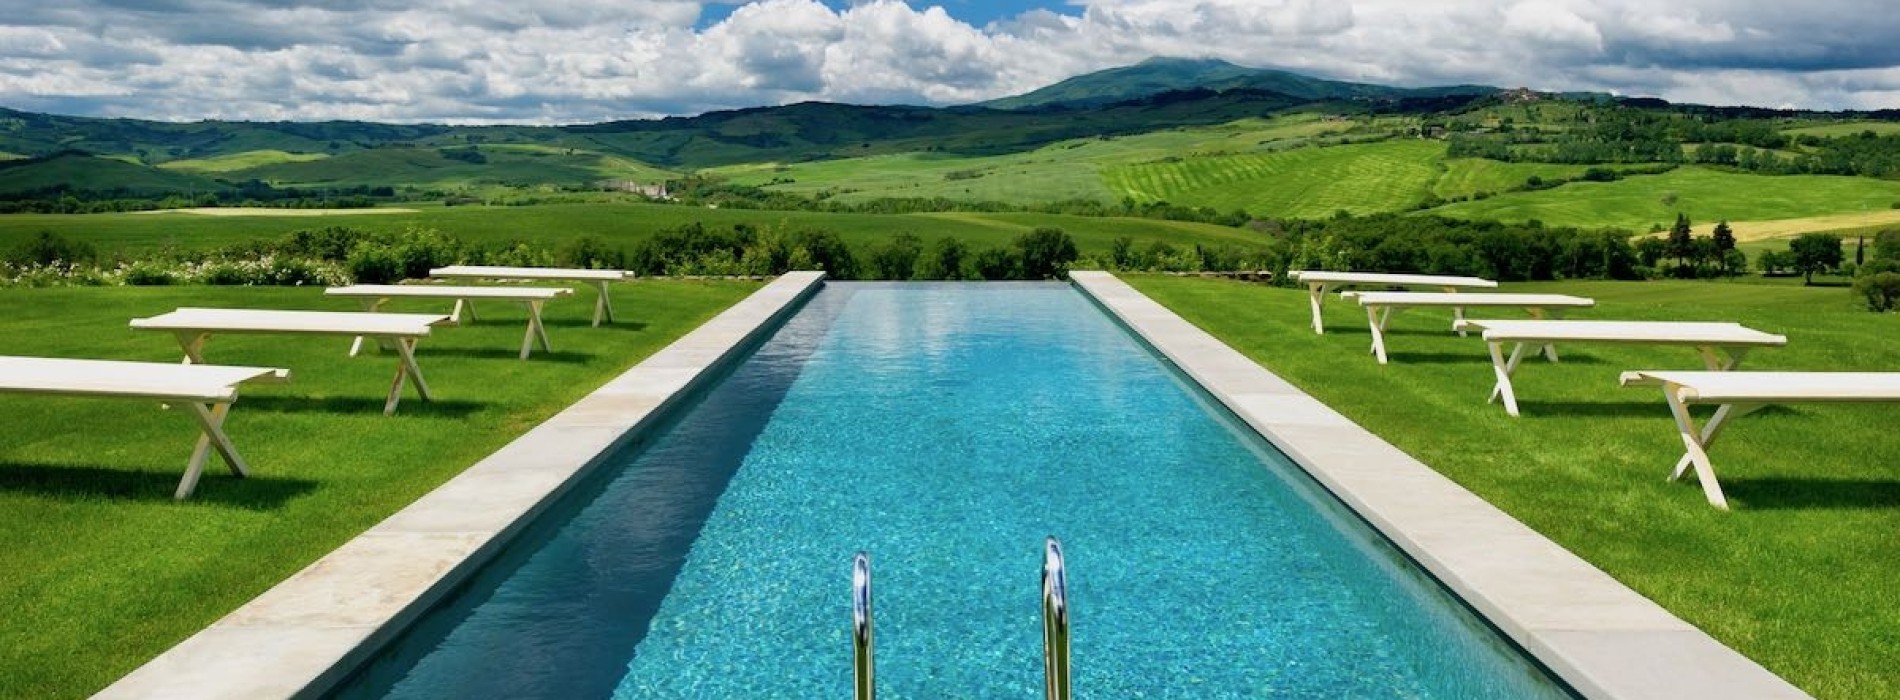 Relax by the infinity pool or hot tub with amazing views